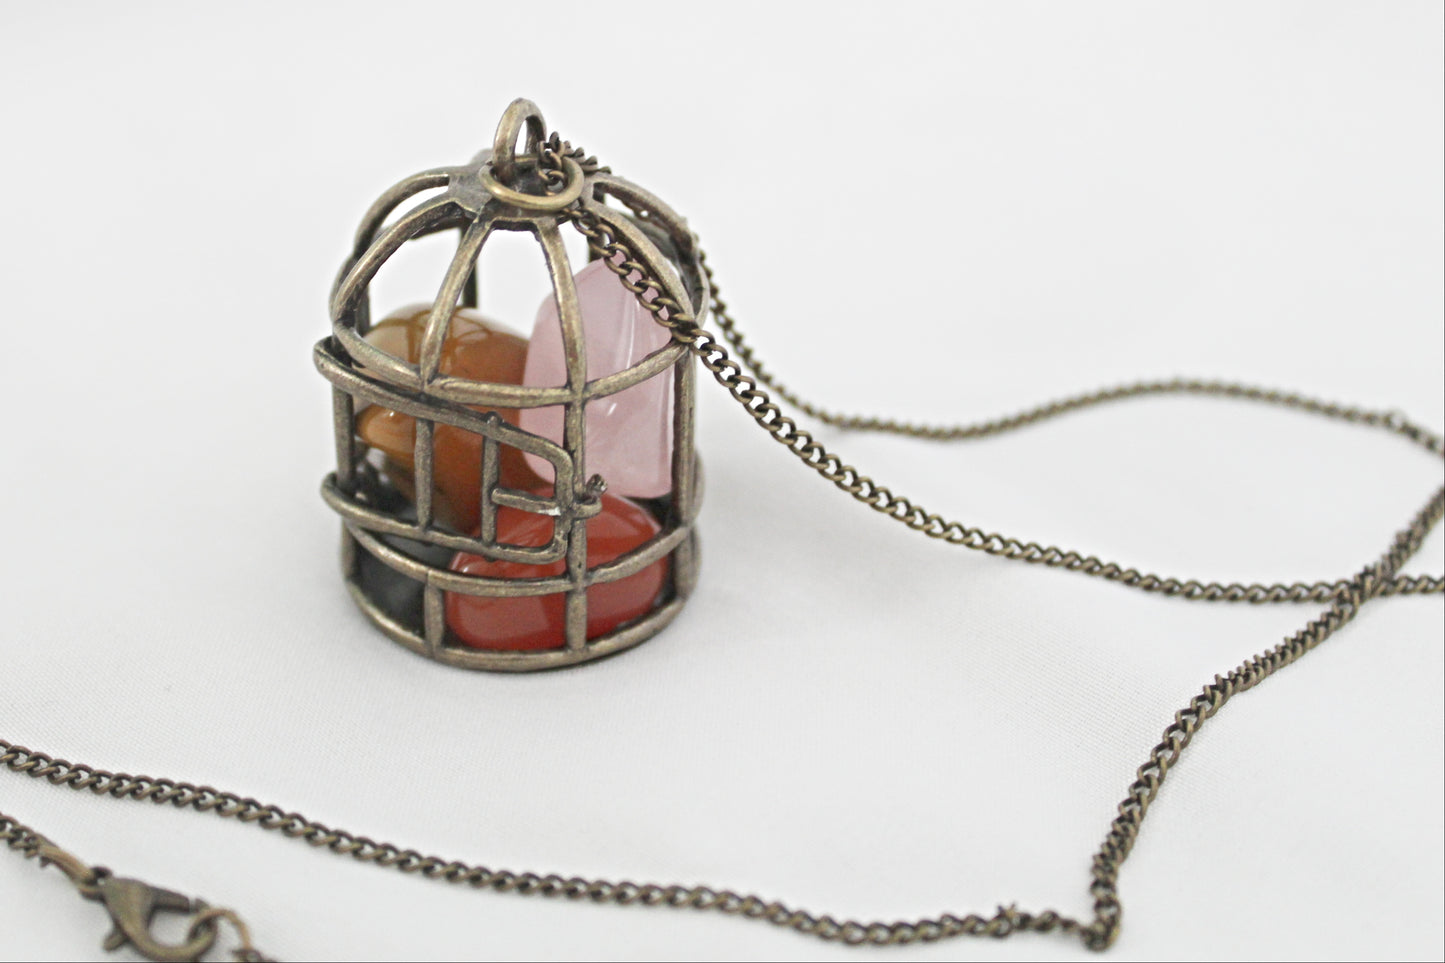 Birdcage Crystal Necklace featuring Mookaite, Rose Quartz, and Carnelian